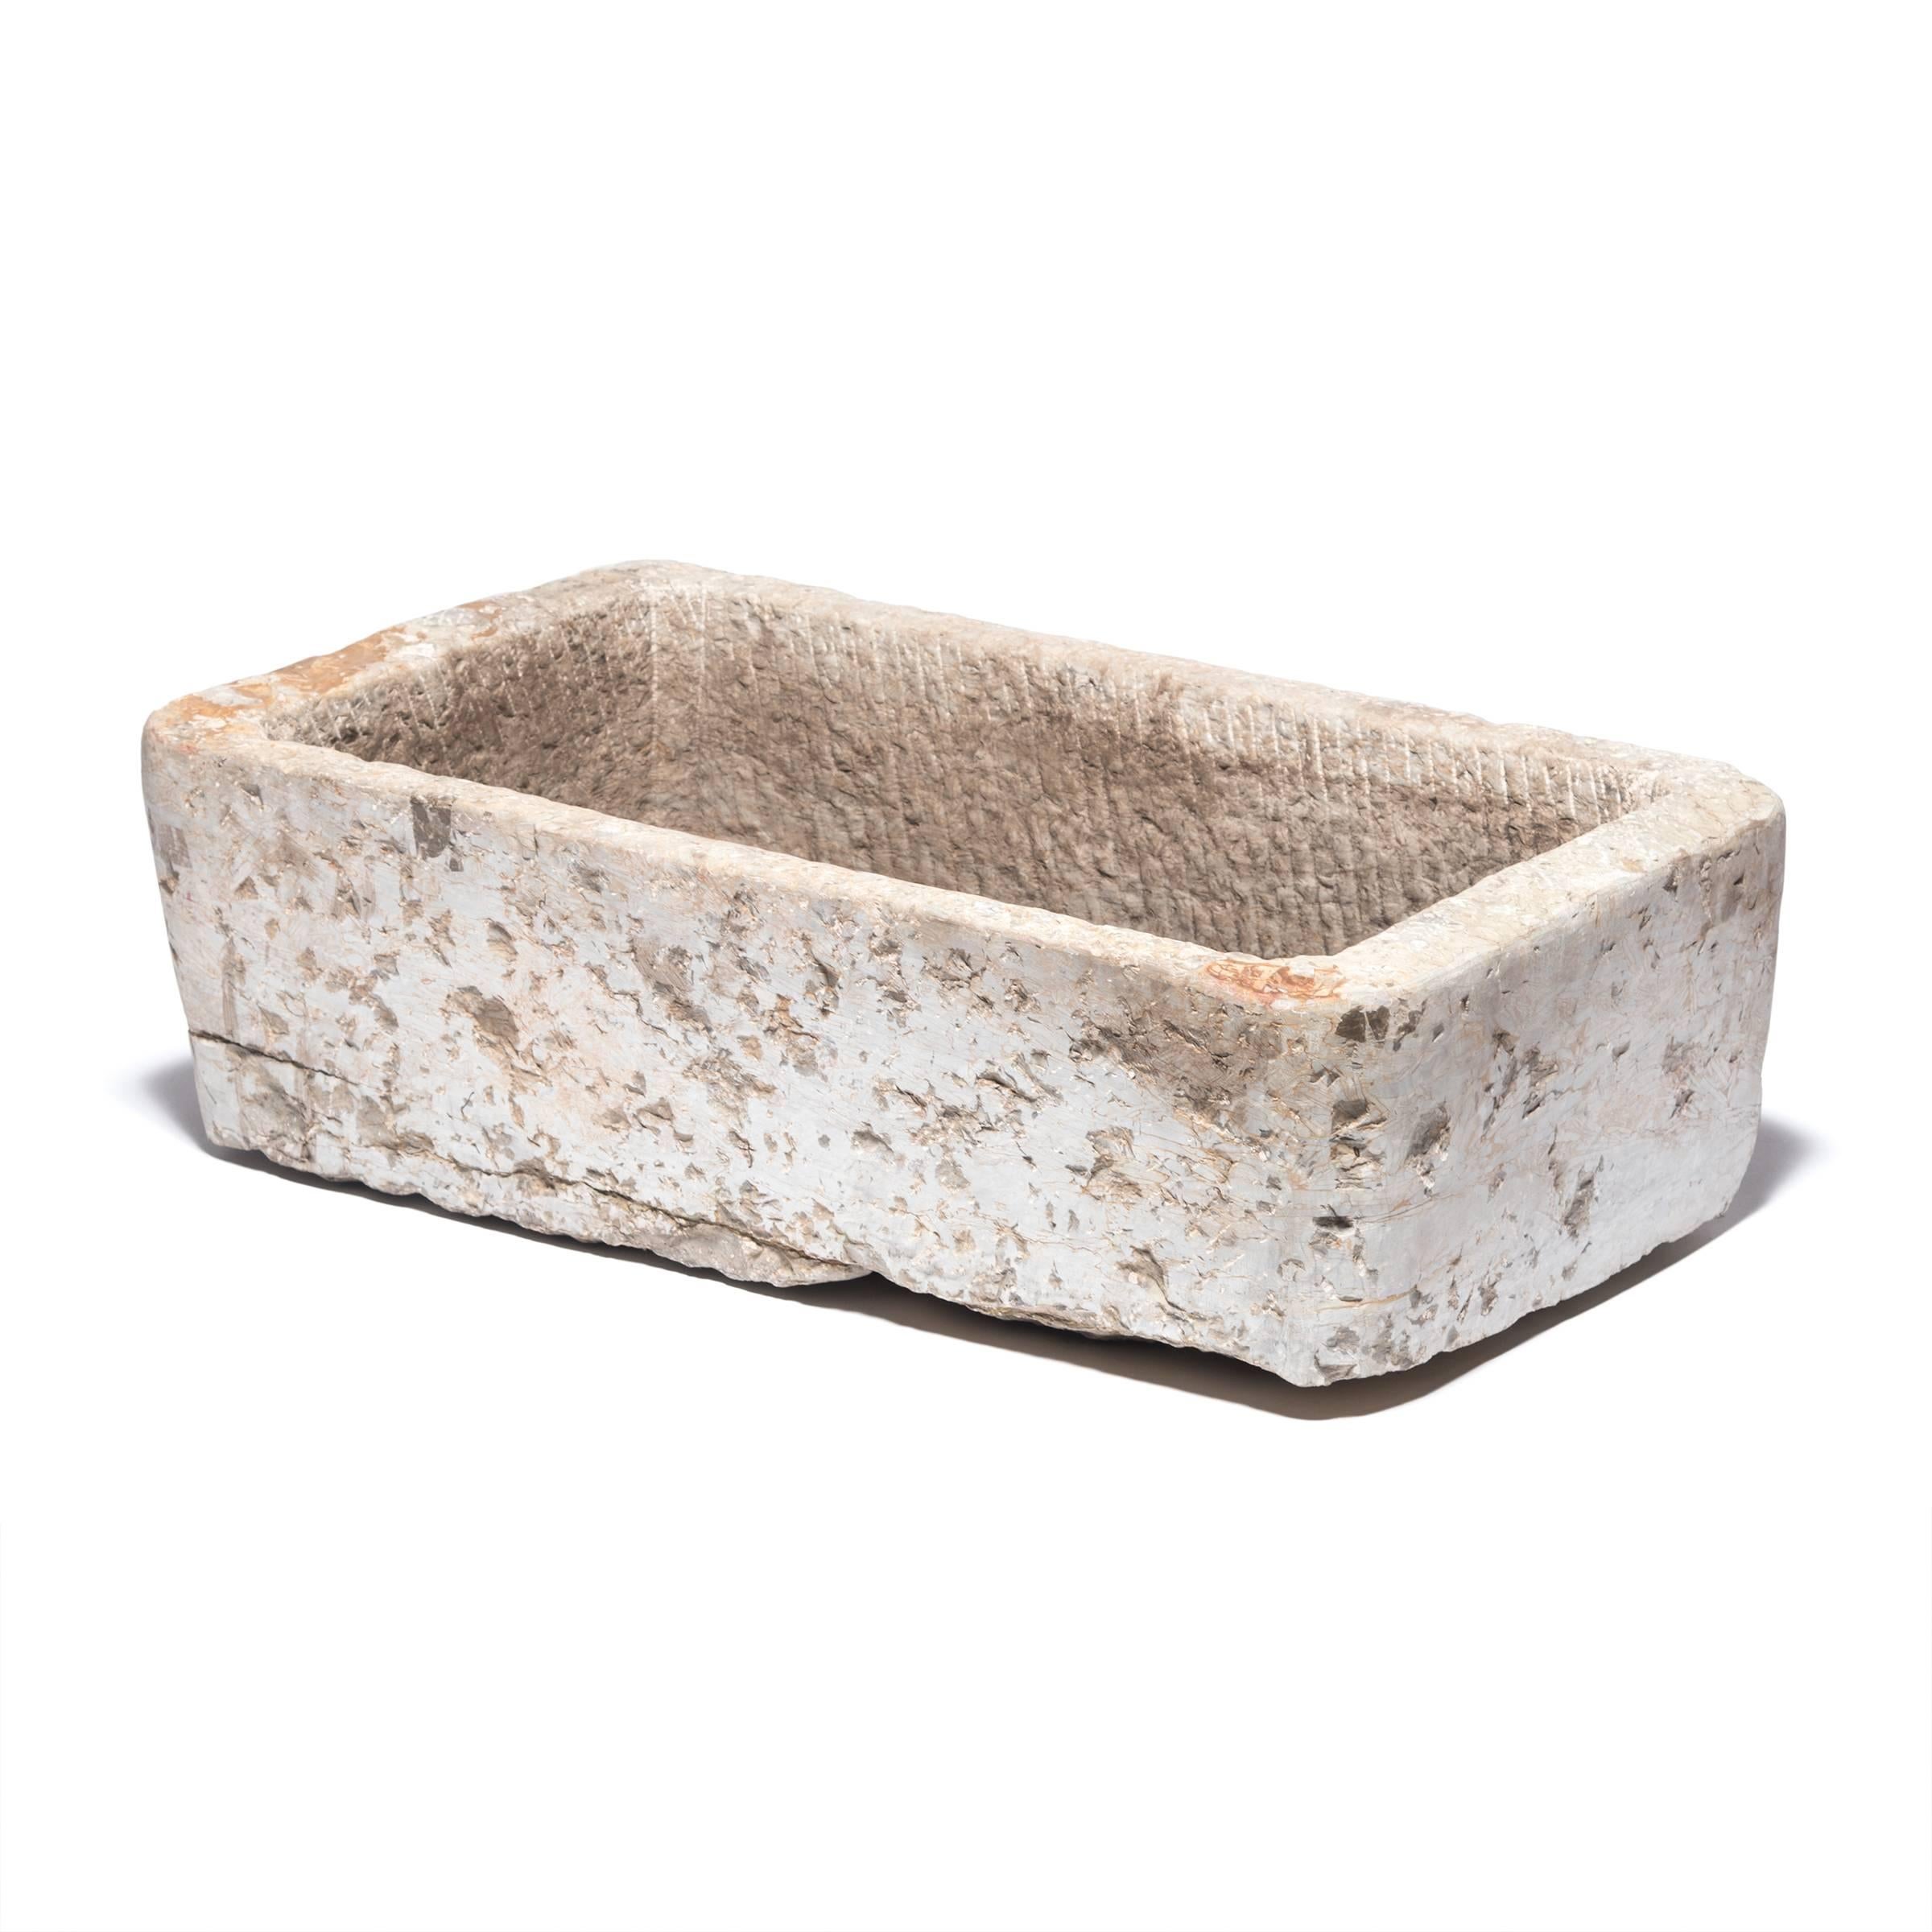 Prized mounts once took refreshment from this stone trough, carved from a solid block of limestone more than hundred years ago. Once purely functional, the trough is celebrated today for its elegant, simple form and rustic authenticity. With